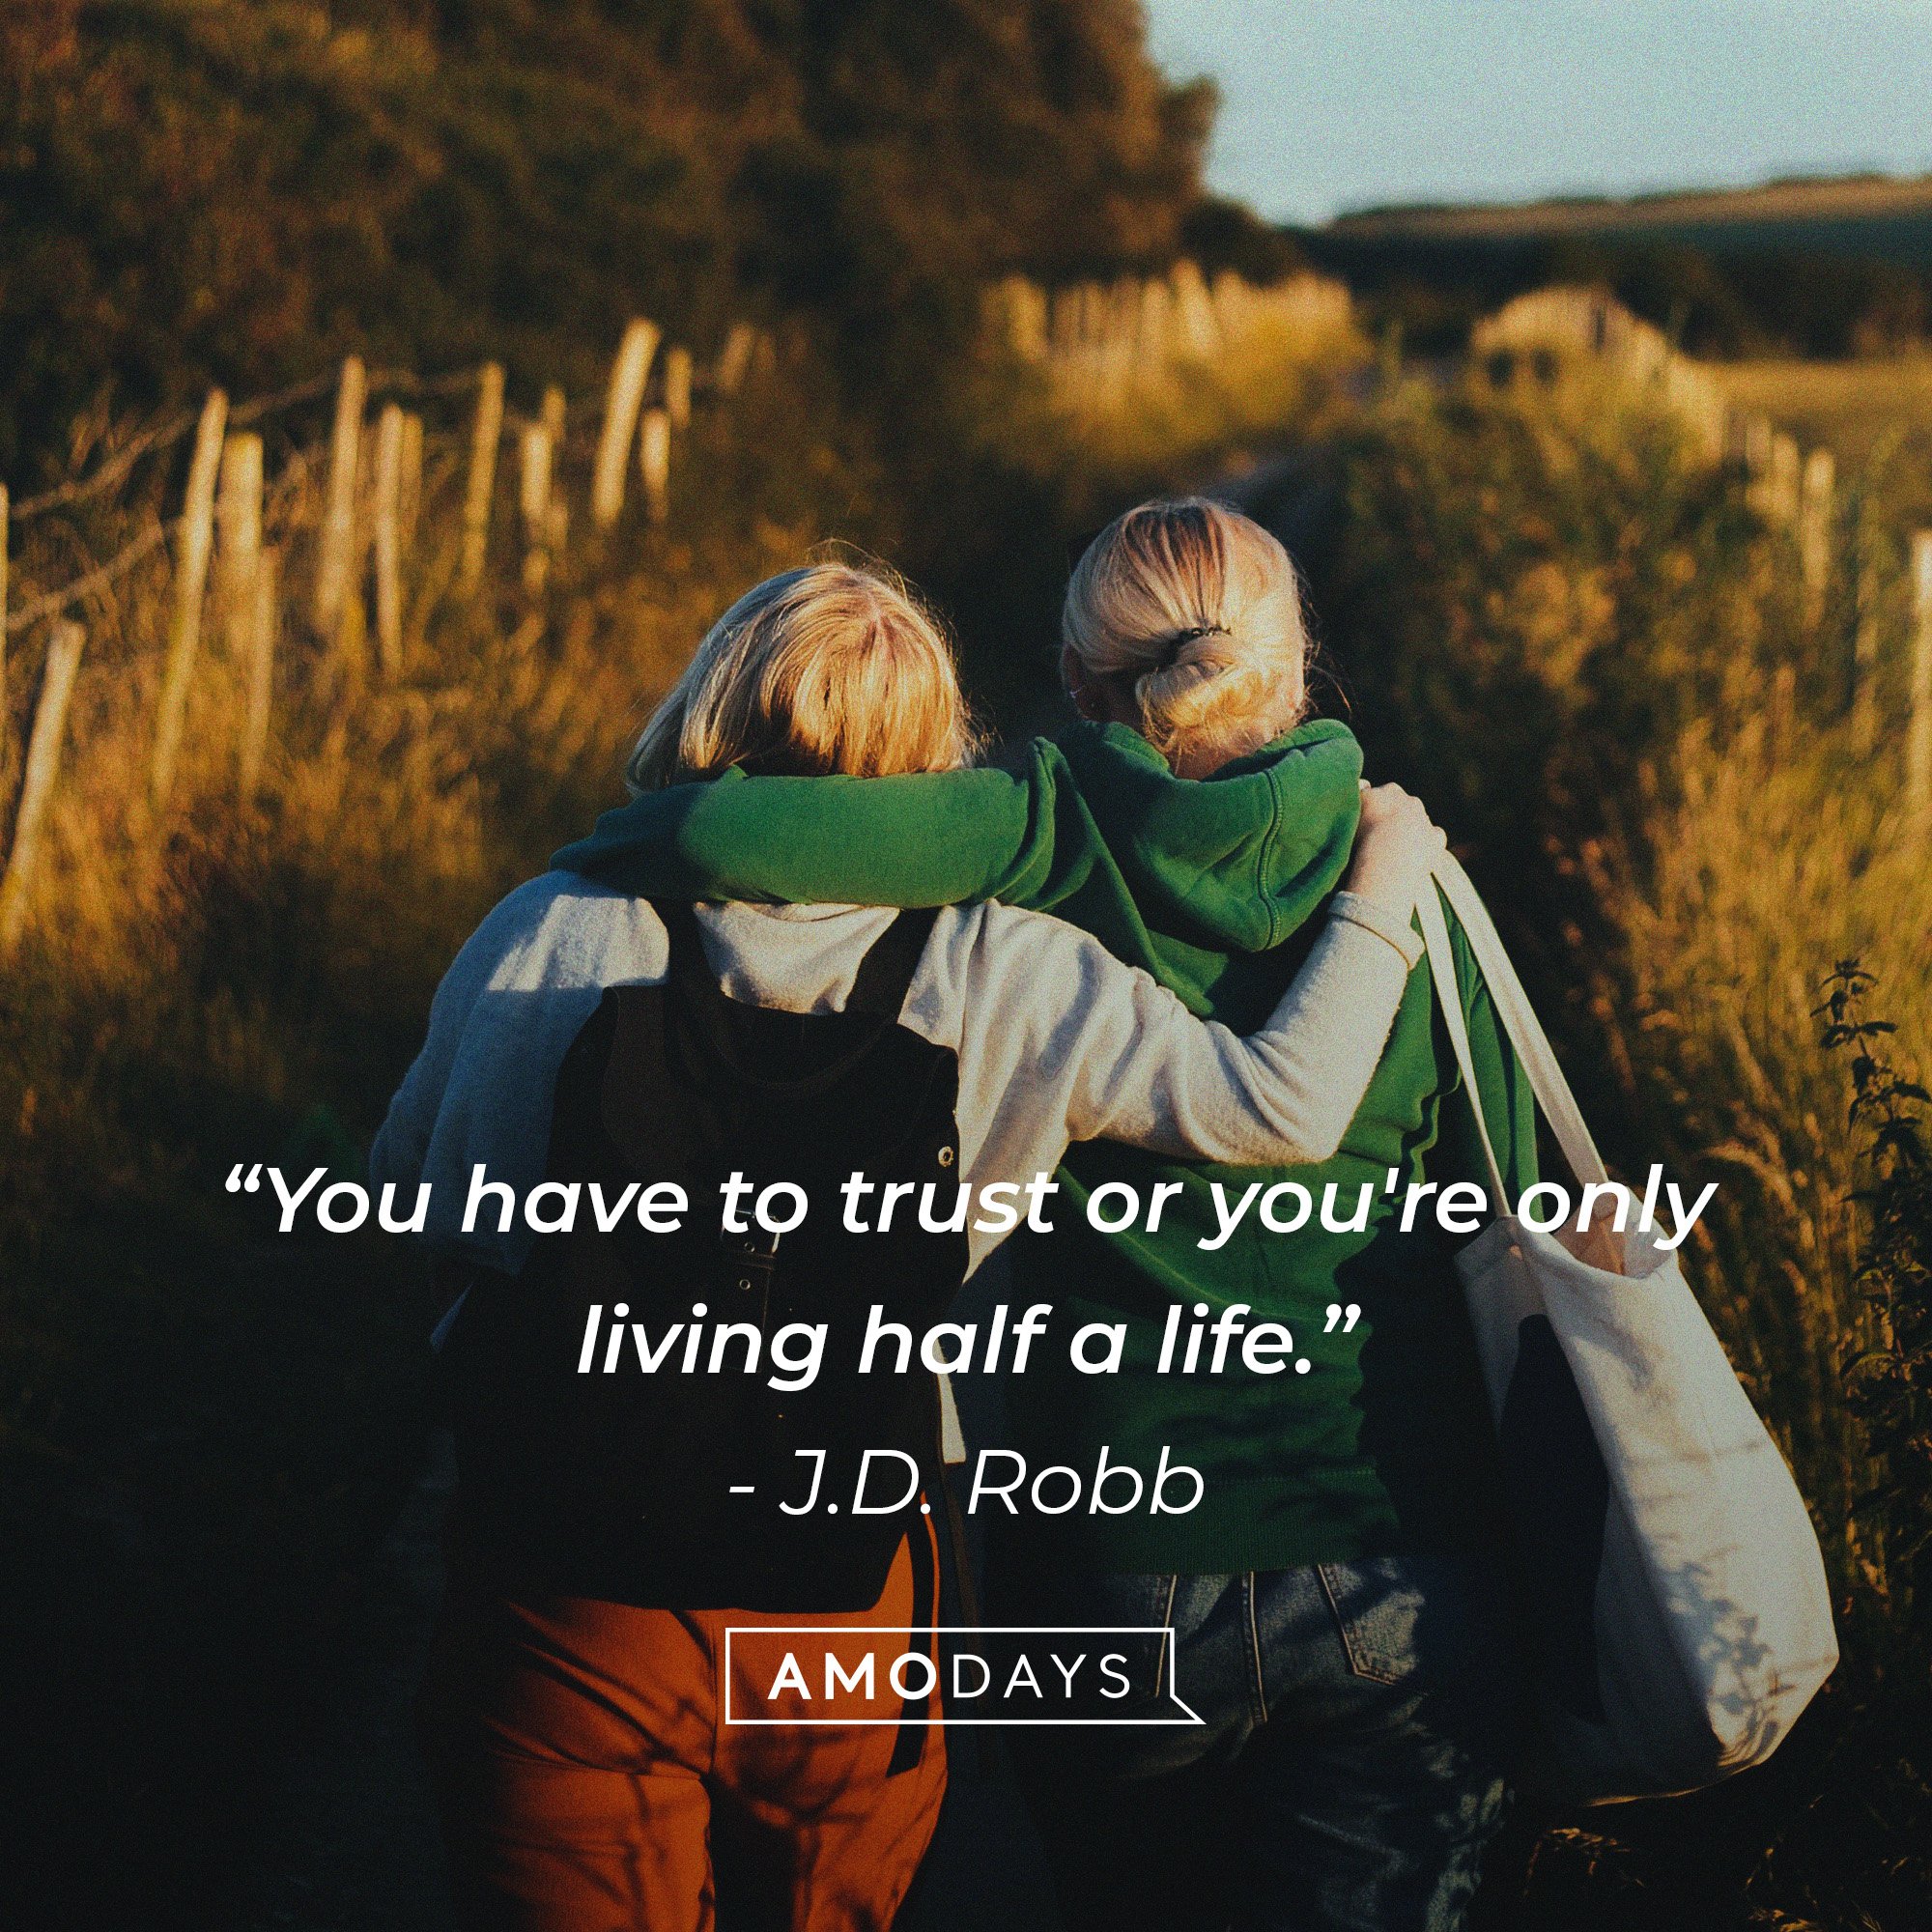 J.D. Robb’s quote: “You have to trust or you're only living half a life.” | Image: AmoDays